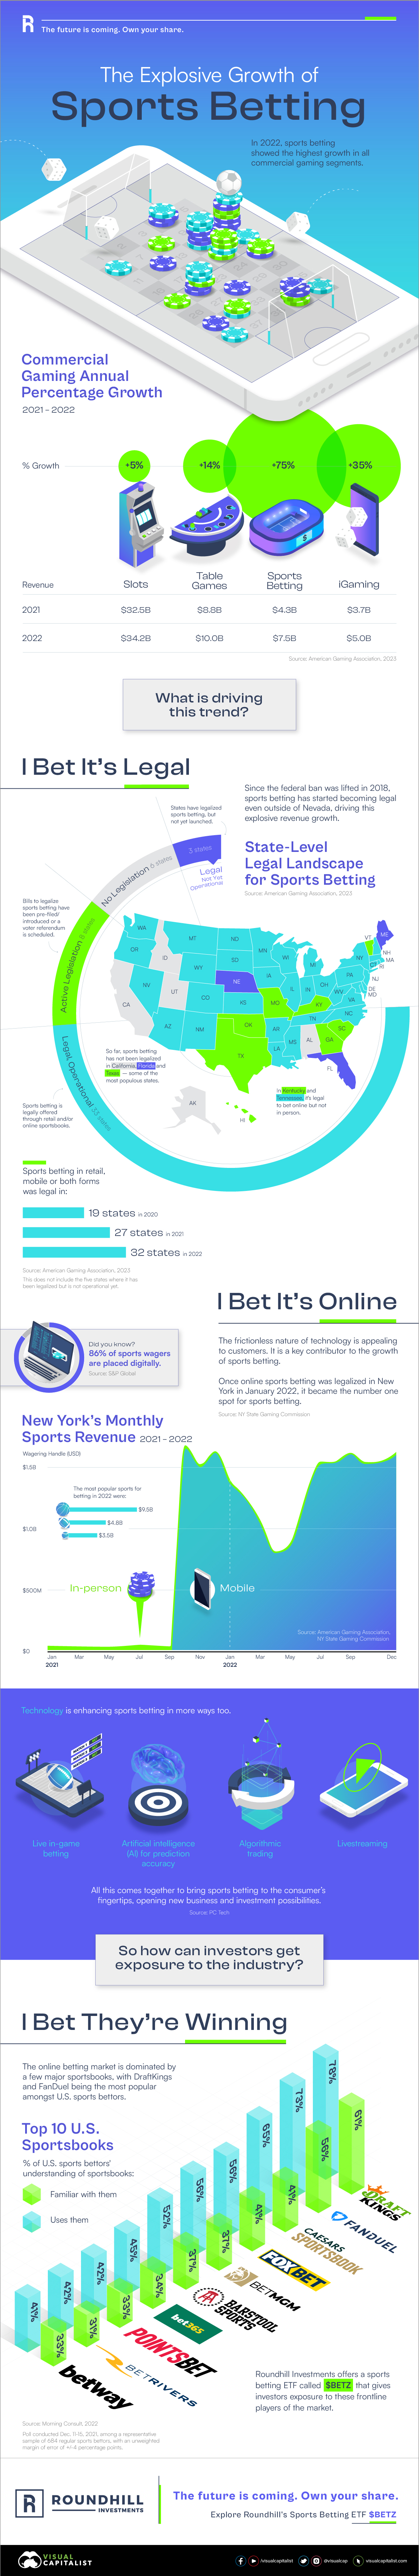 The-Explosive-Growth-of-Sports-Betting